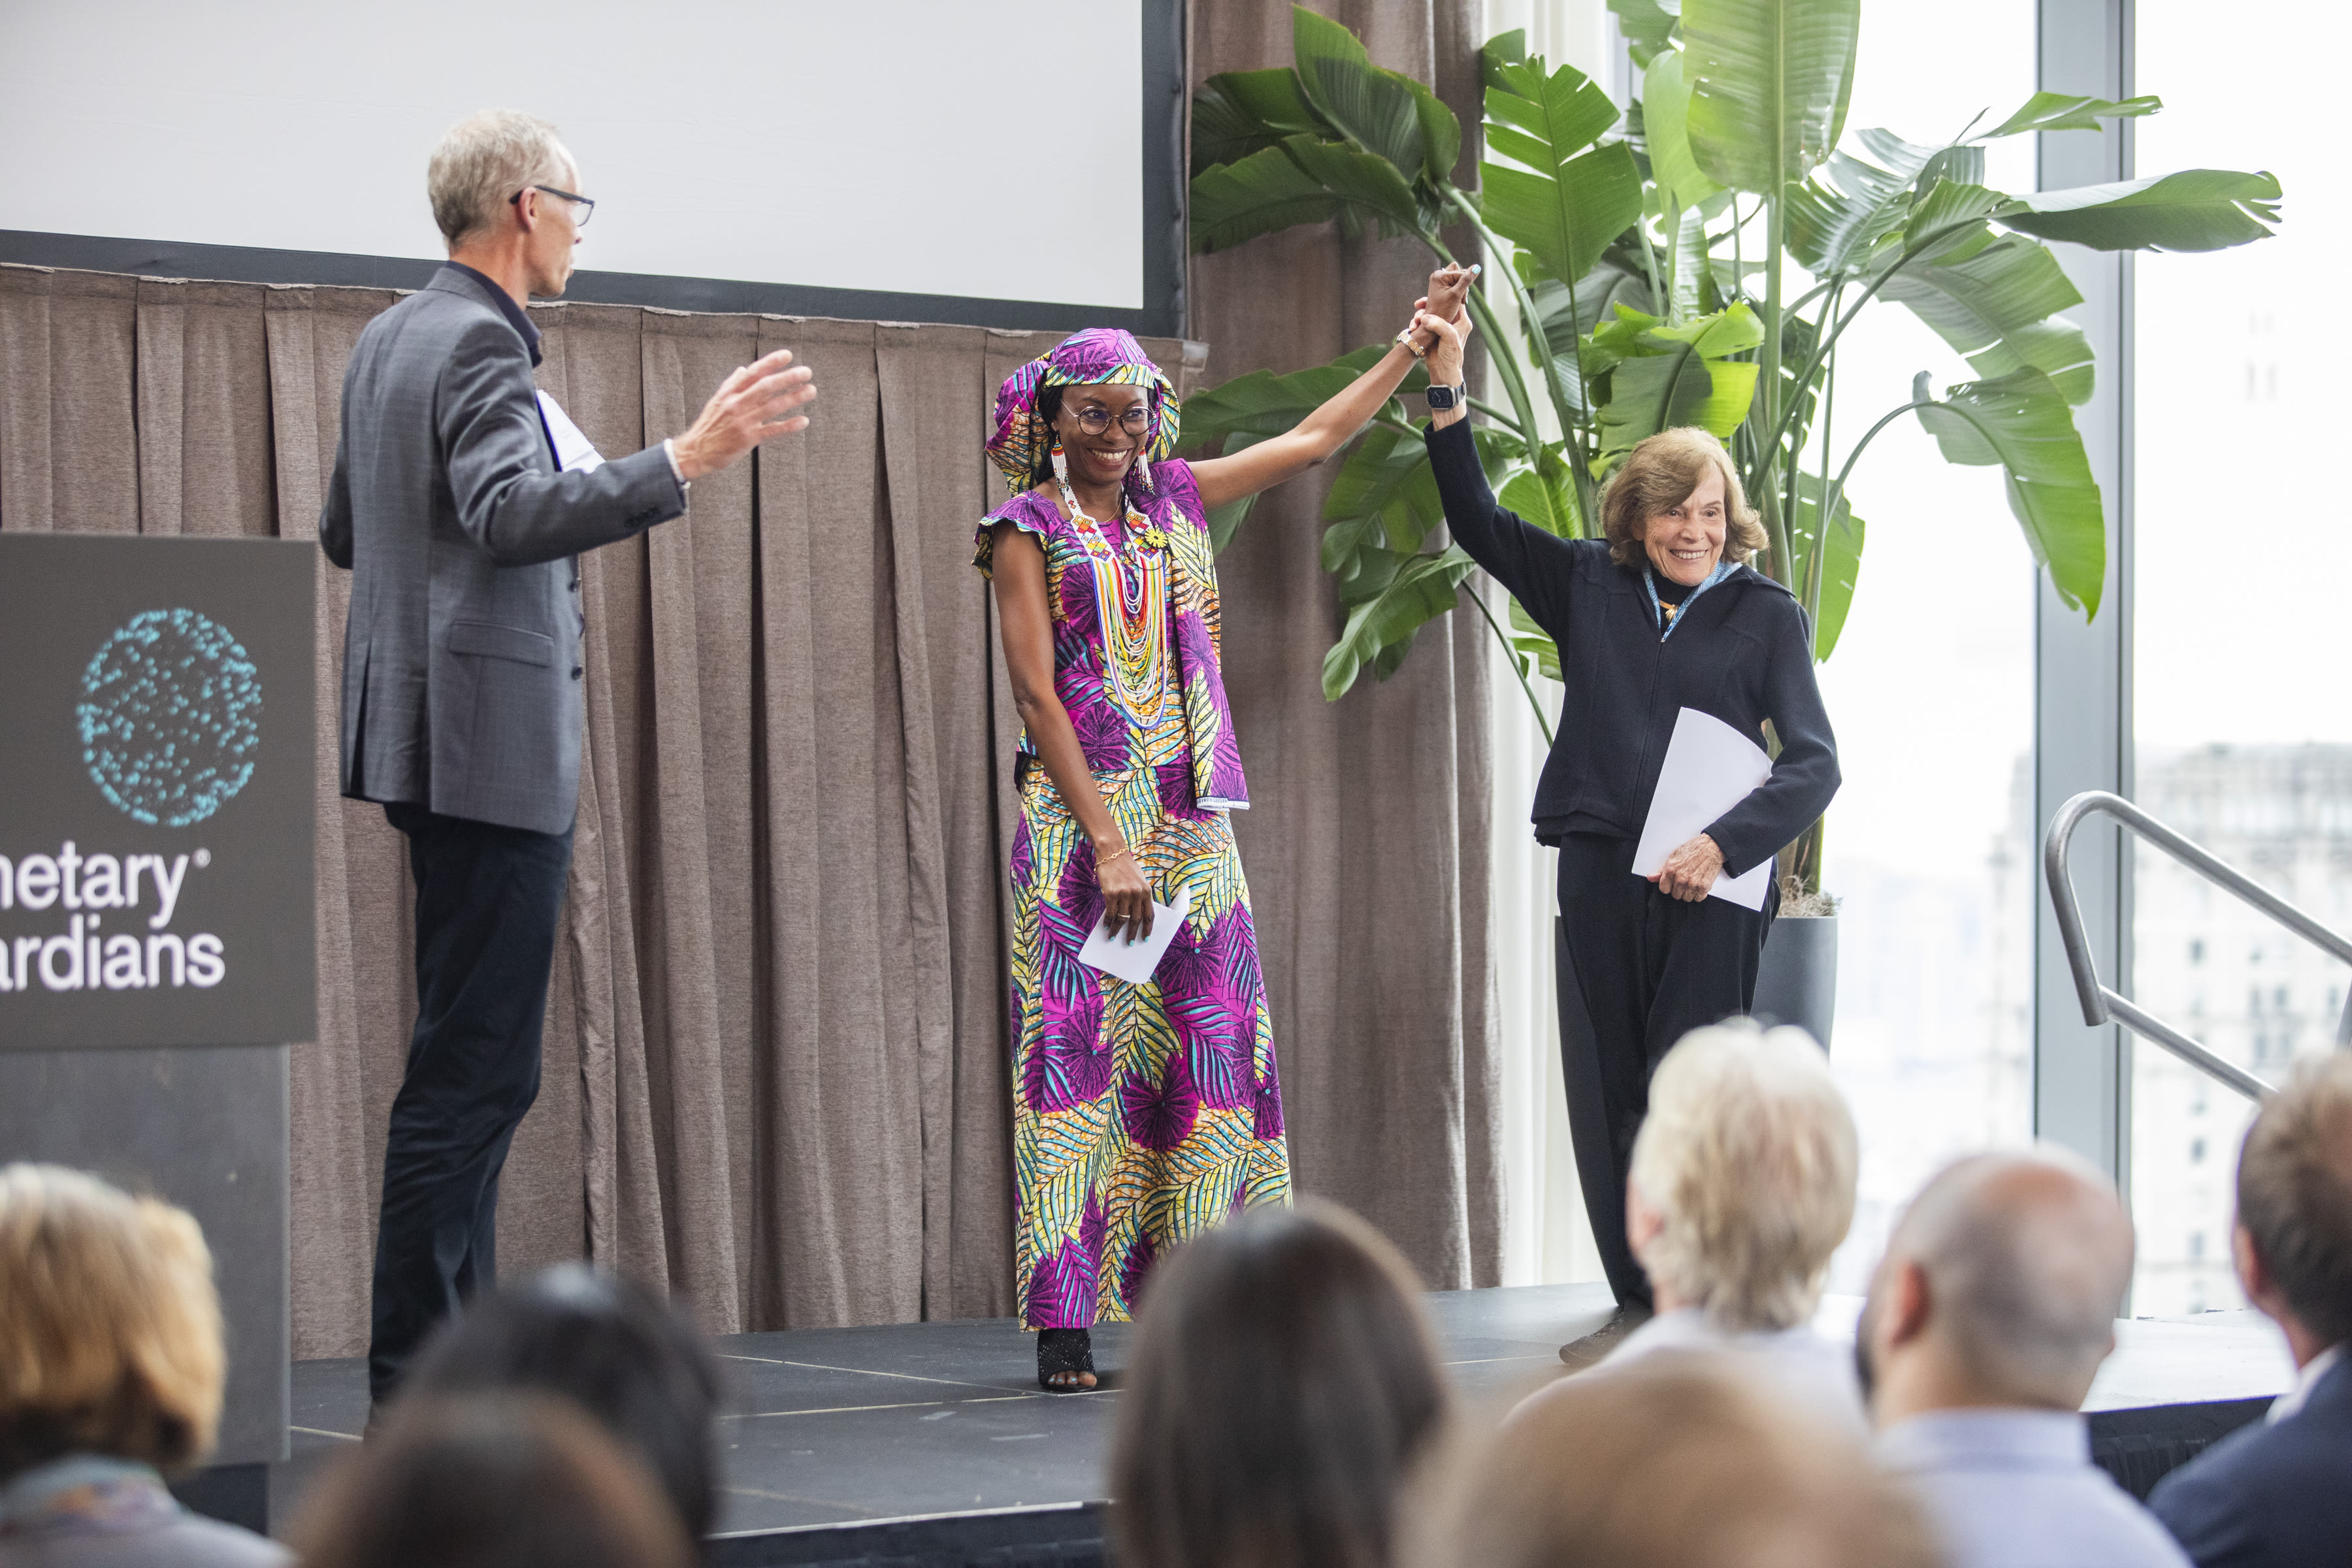 Johan Rockström, Hindou Ibrahim, Dr Silvia Earle at the launch of the Planetary Guardians